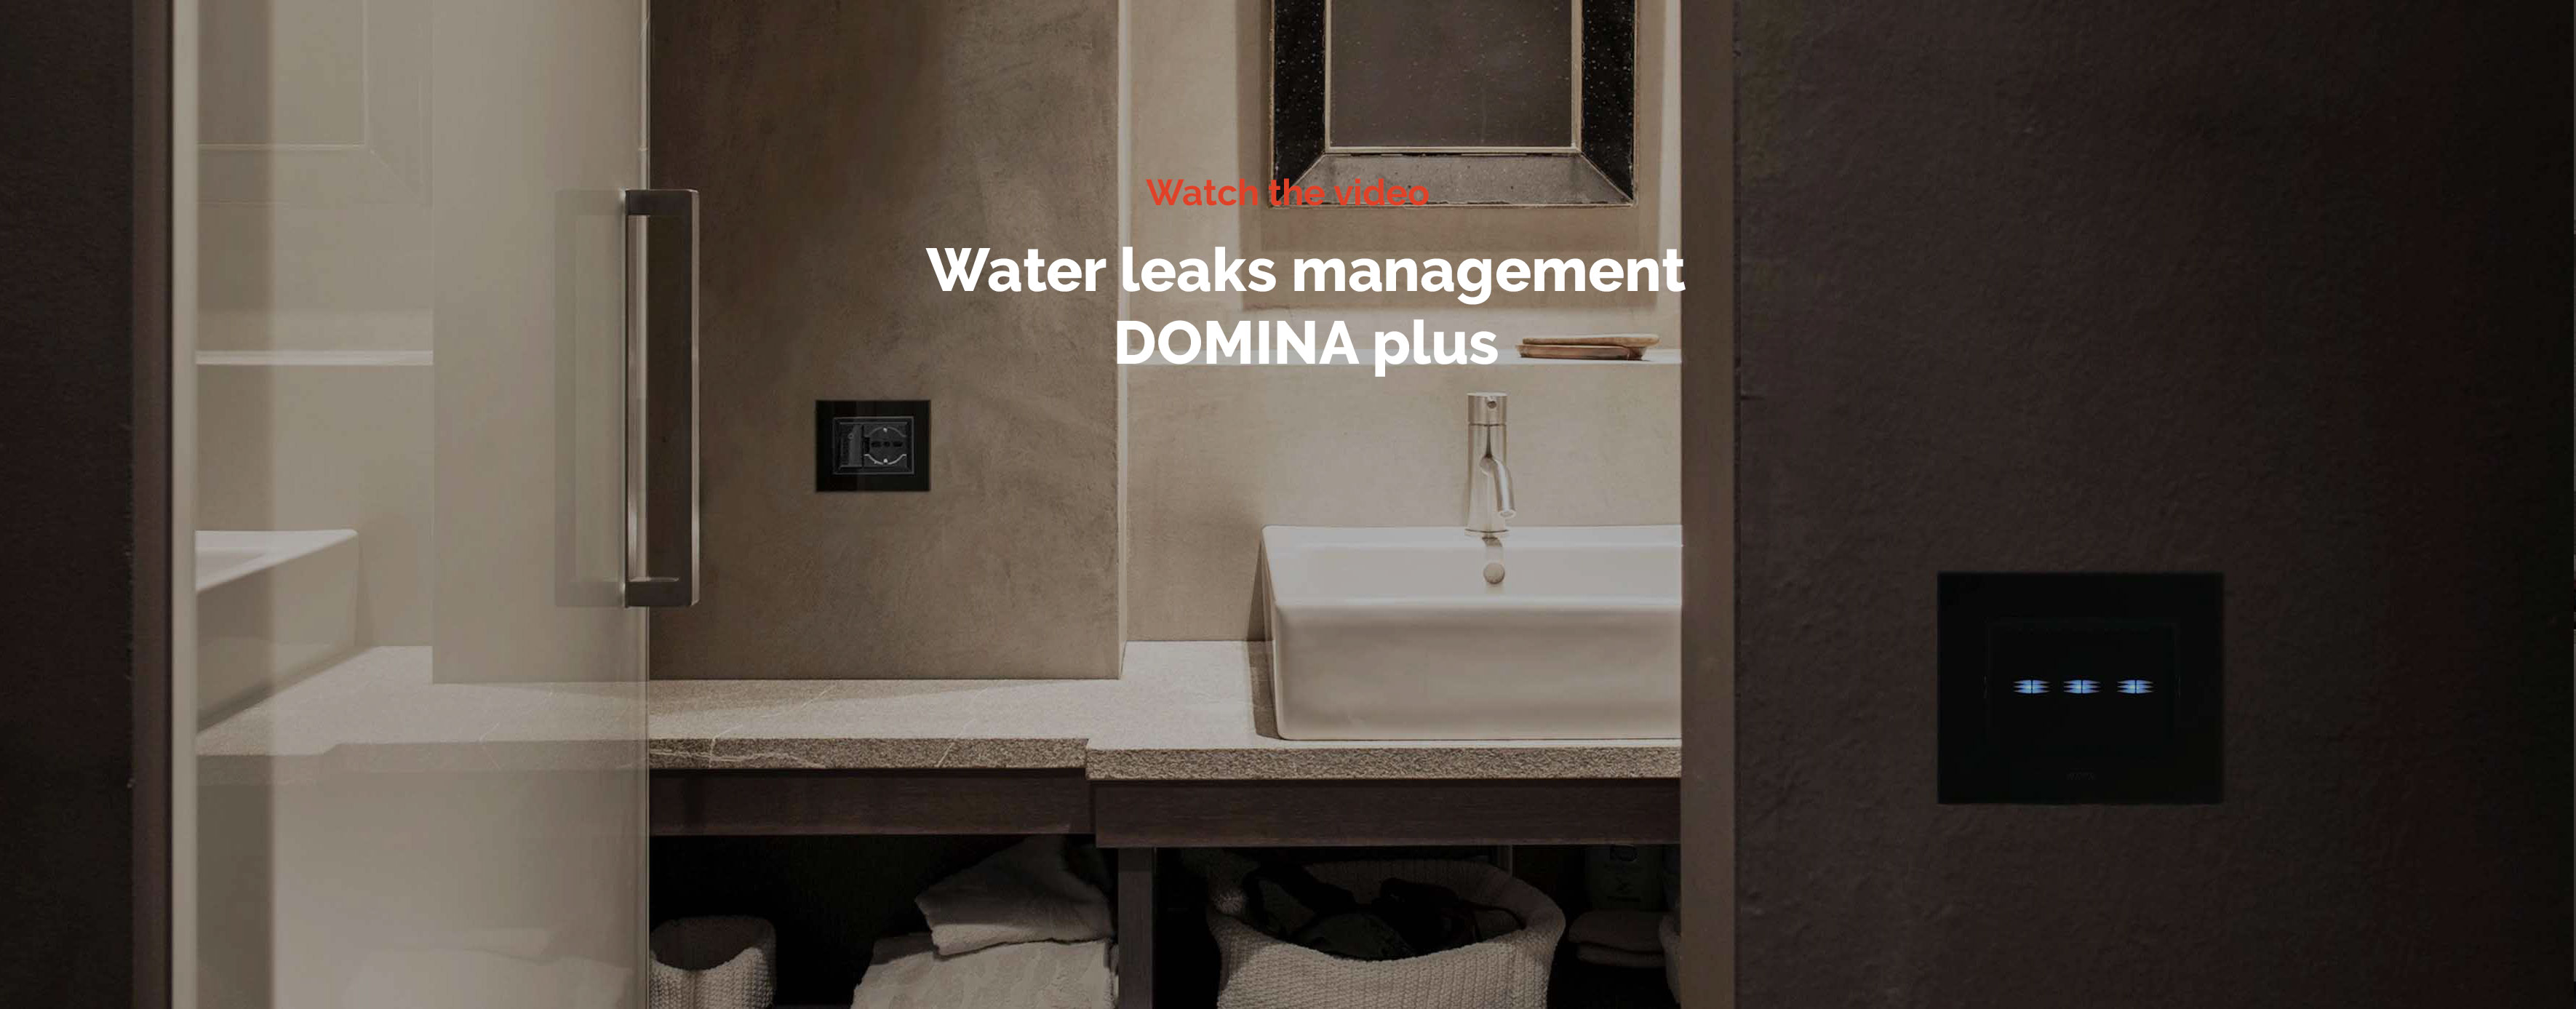 Home automation AVE DOMINA plus – Water leaks video